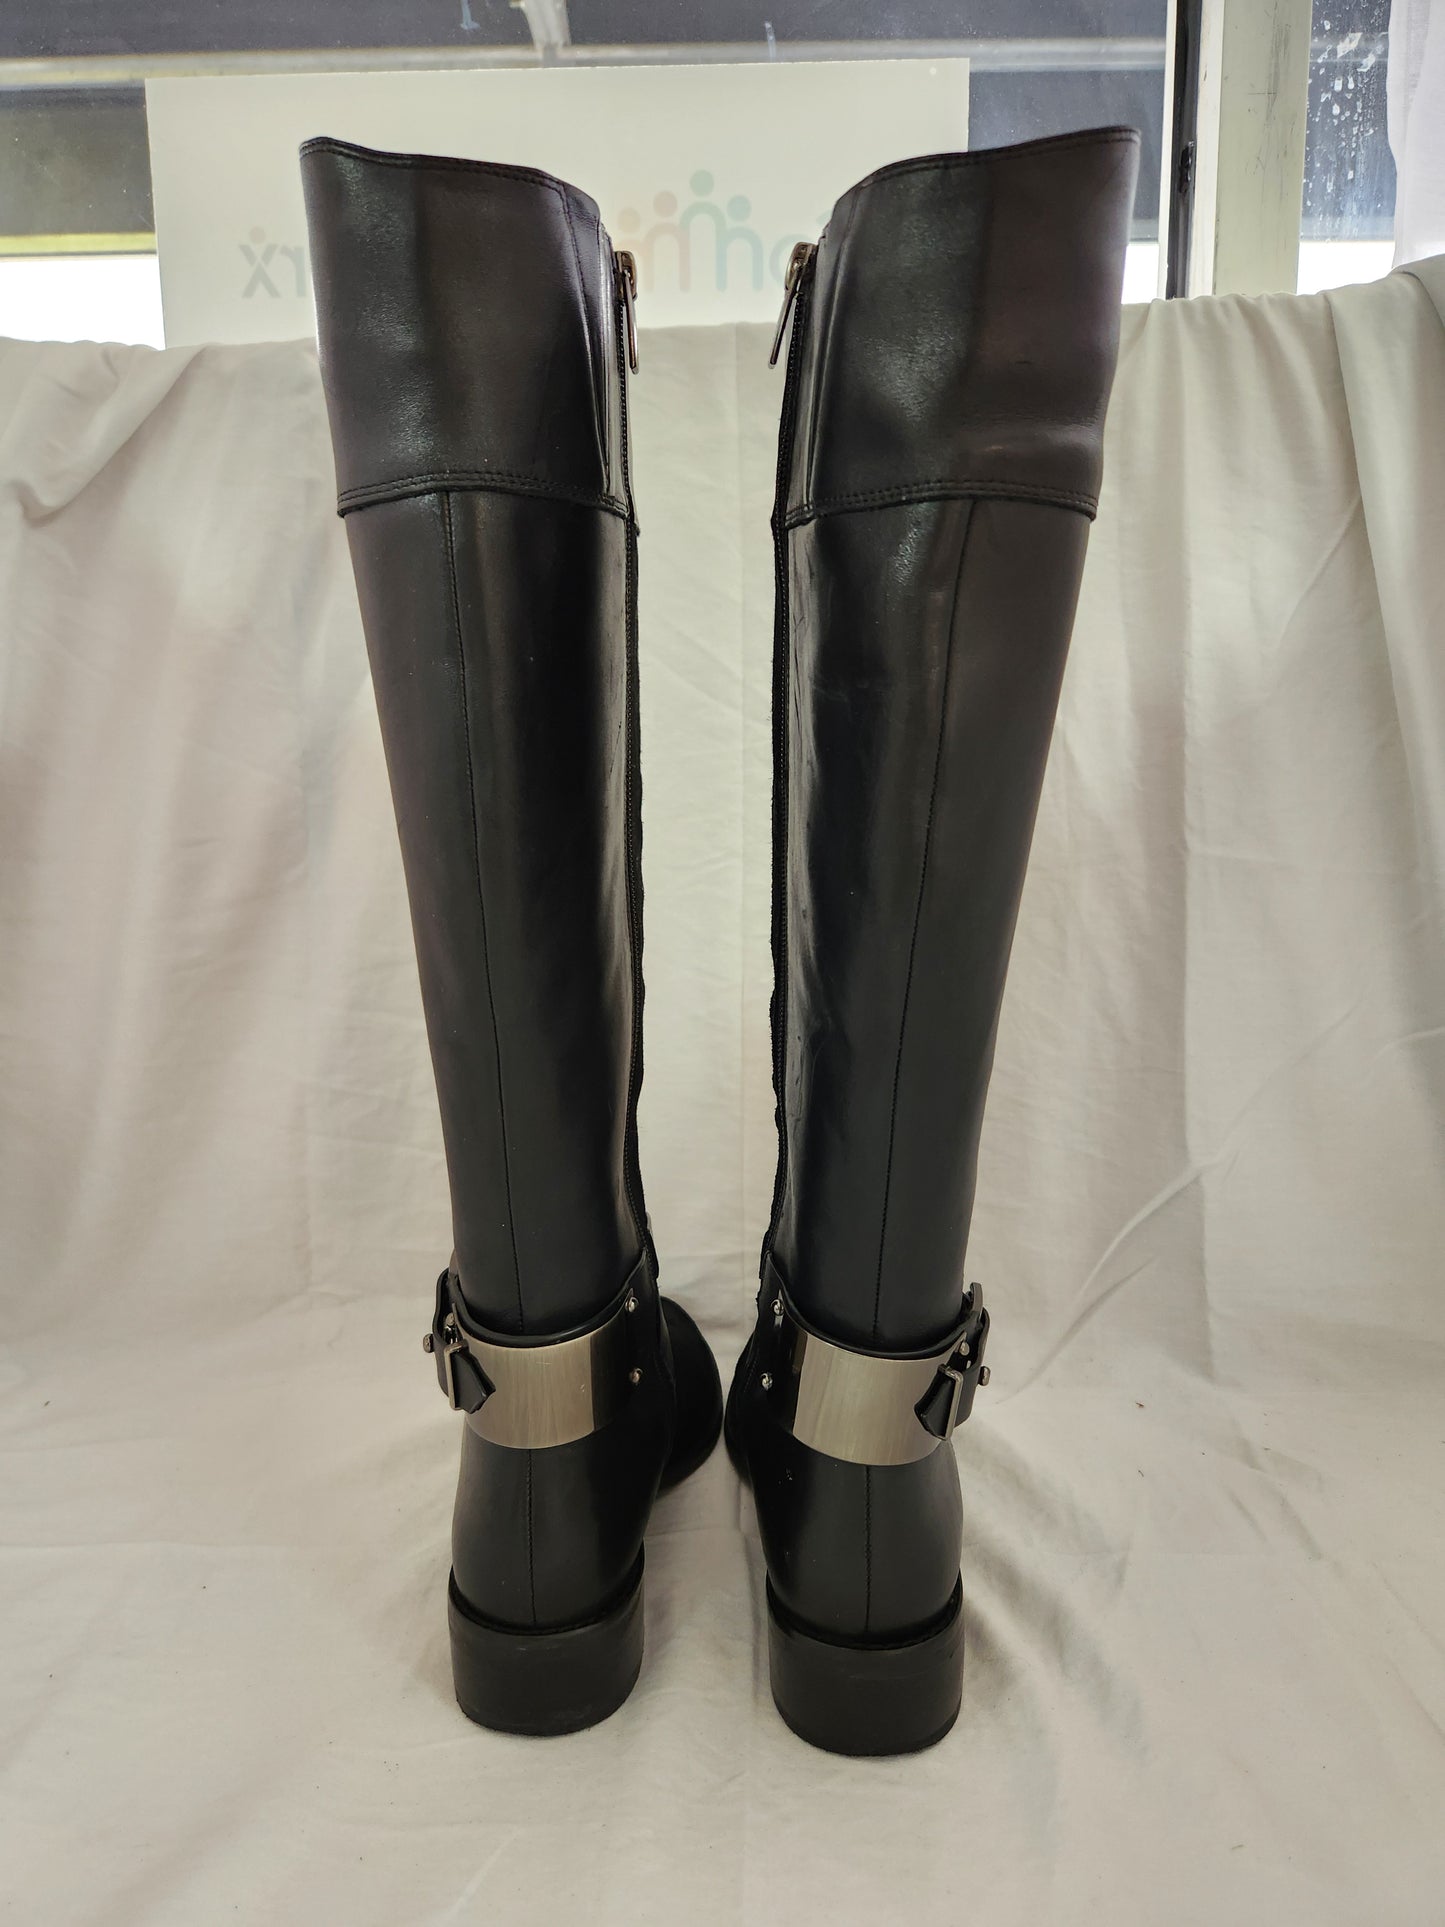 Vince Camuto Black Leather & Suede Jaran Riding Boots - Size: 6.5M